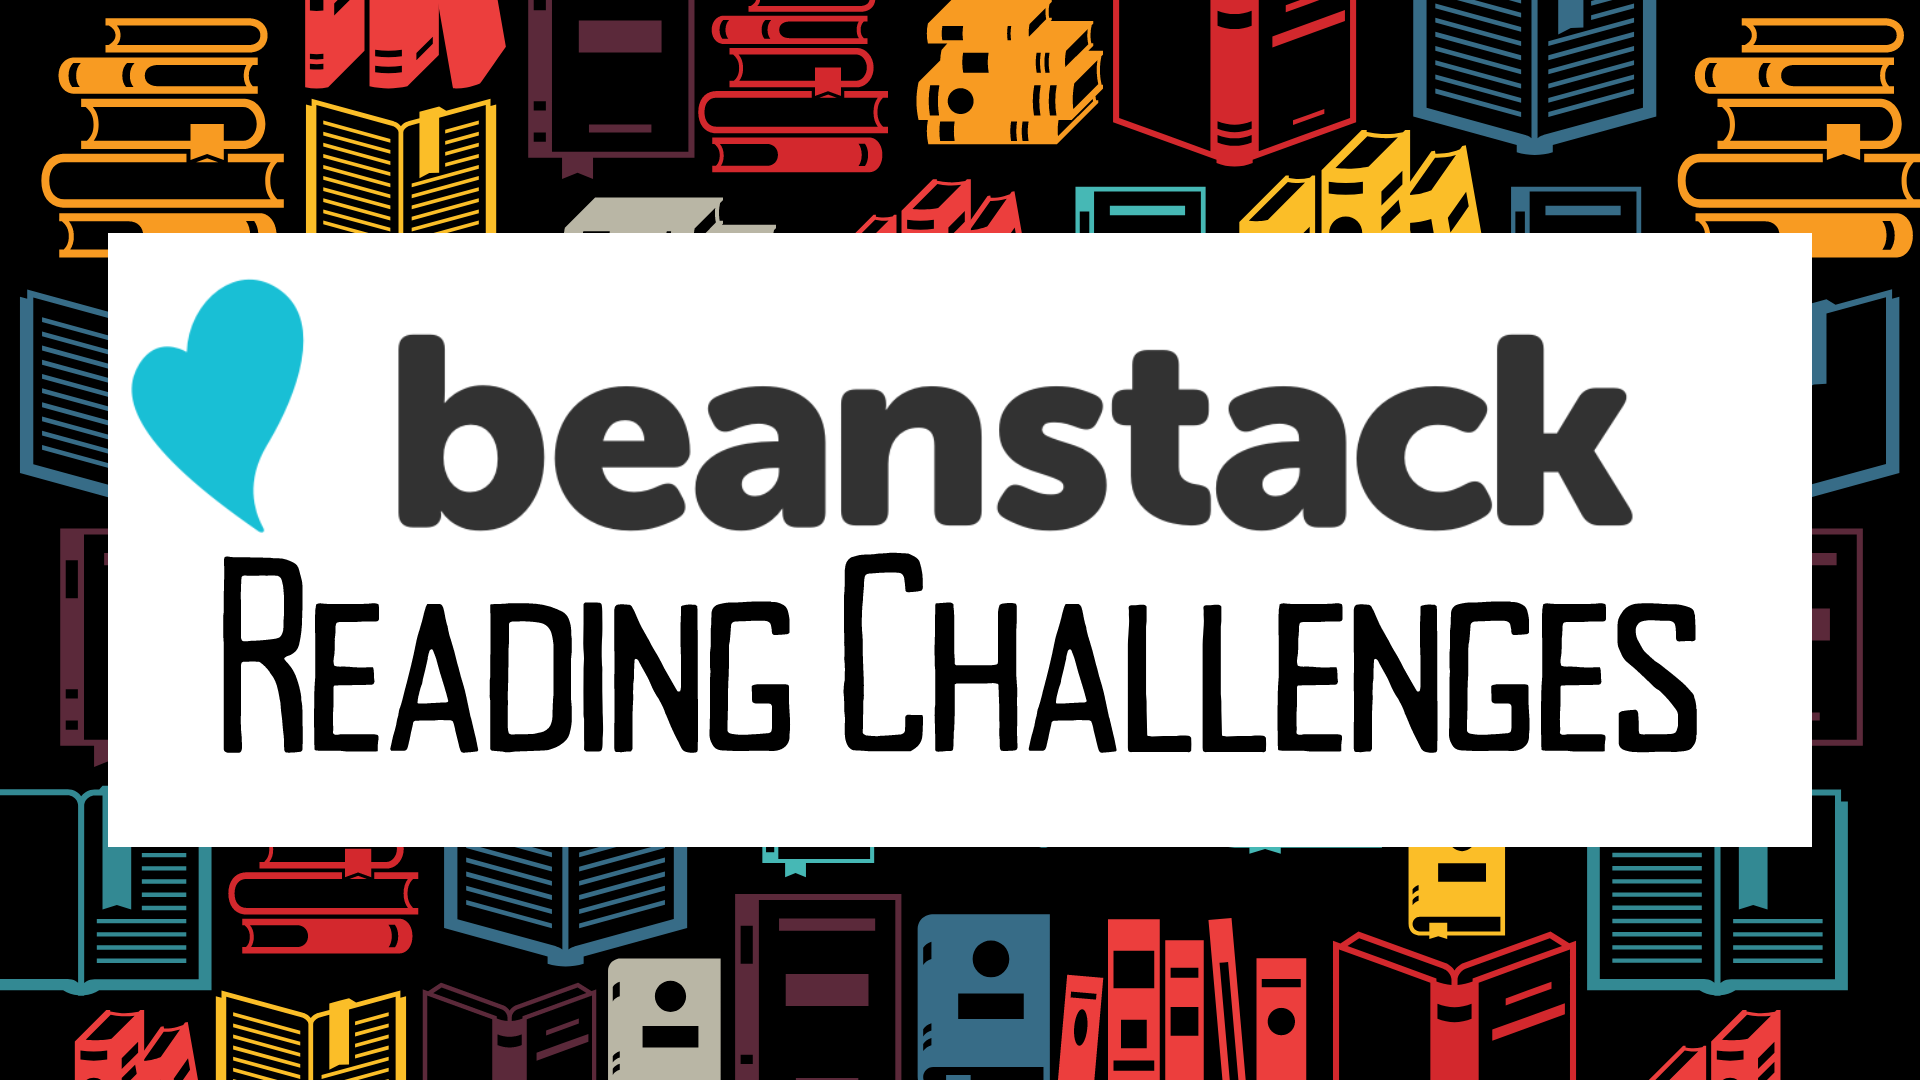 Beanstack Reading Challenges Plymouth Wisconsin